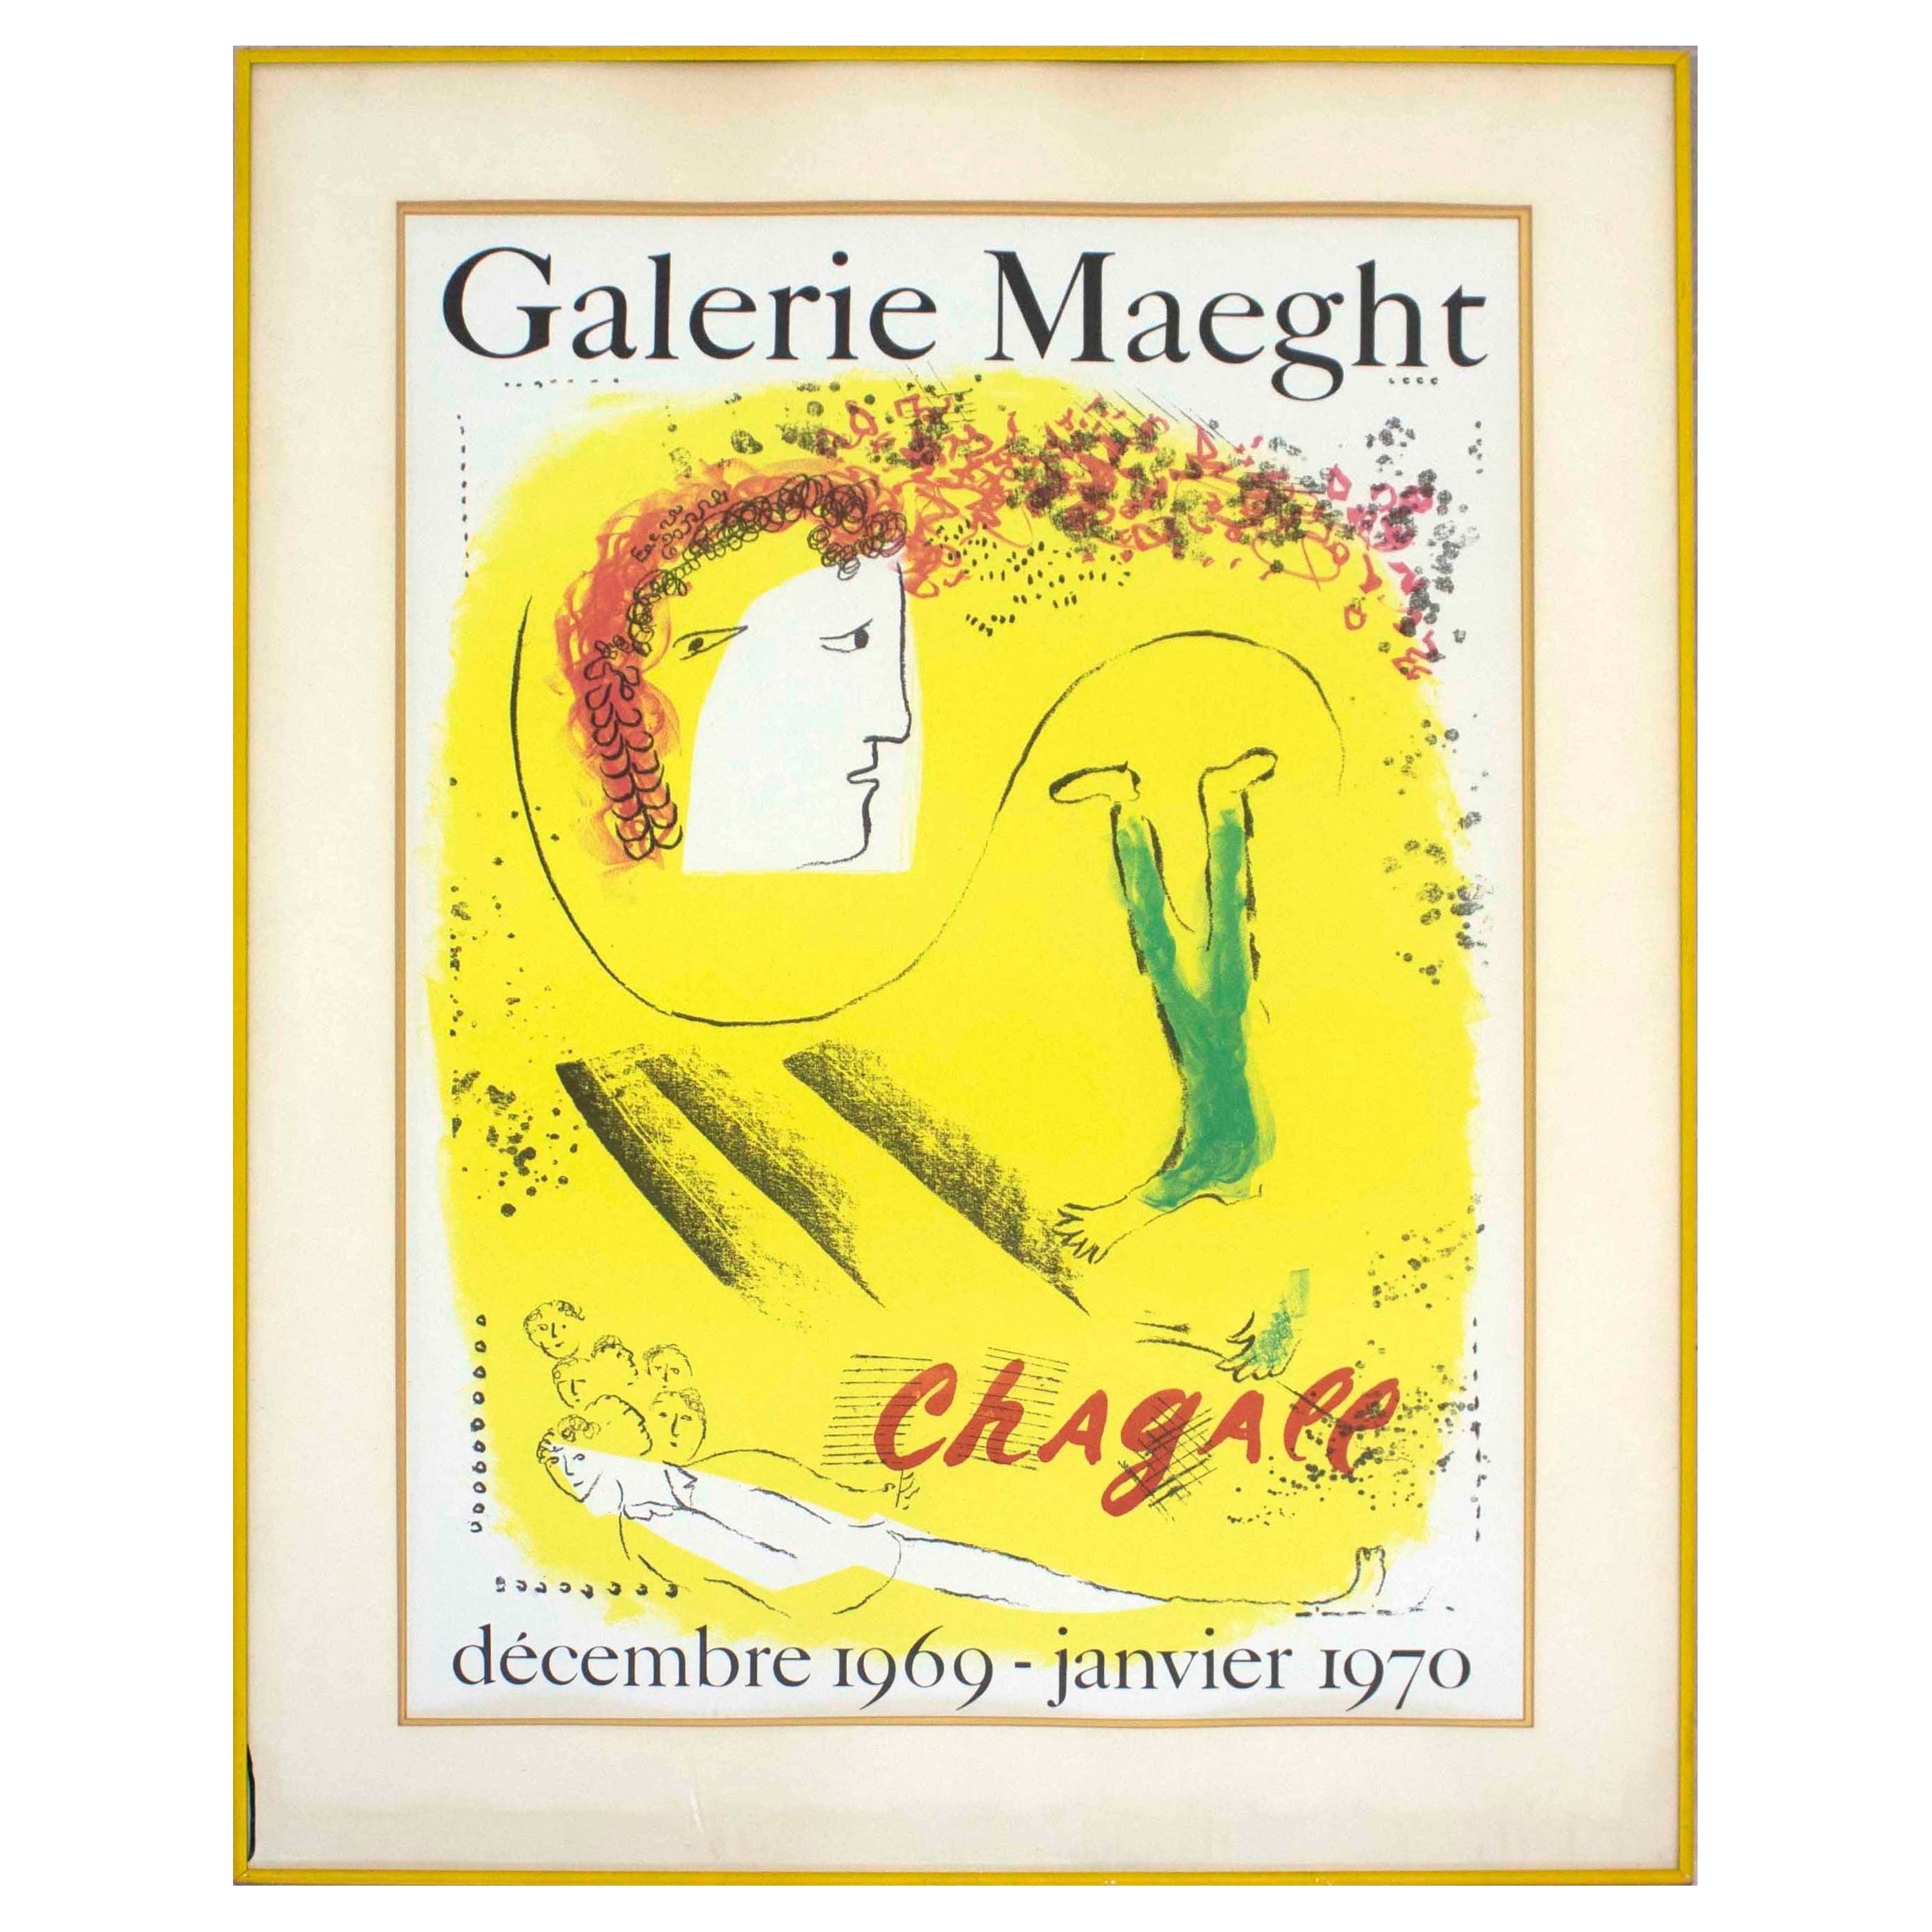 Marc Chagall Le Fond Jaune Galerie Maeght Exhibition Poster, 1969